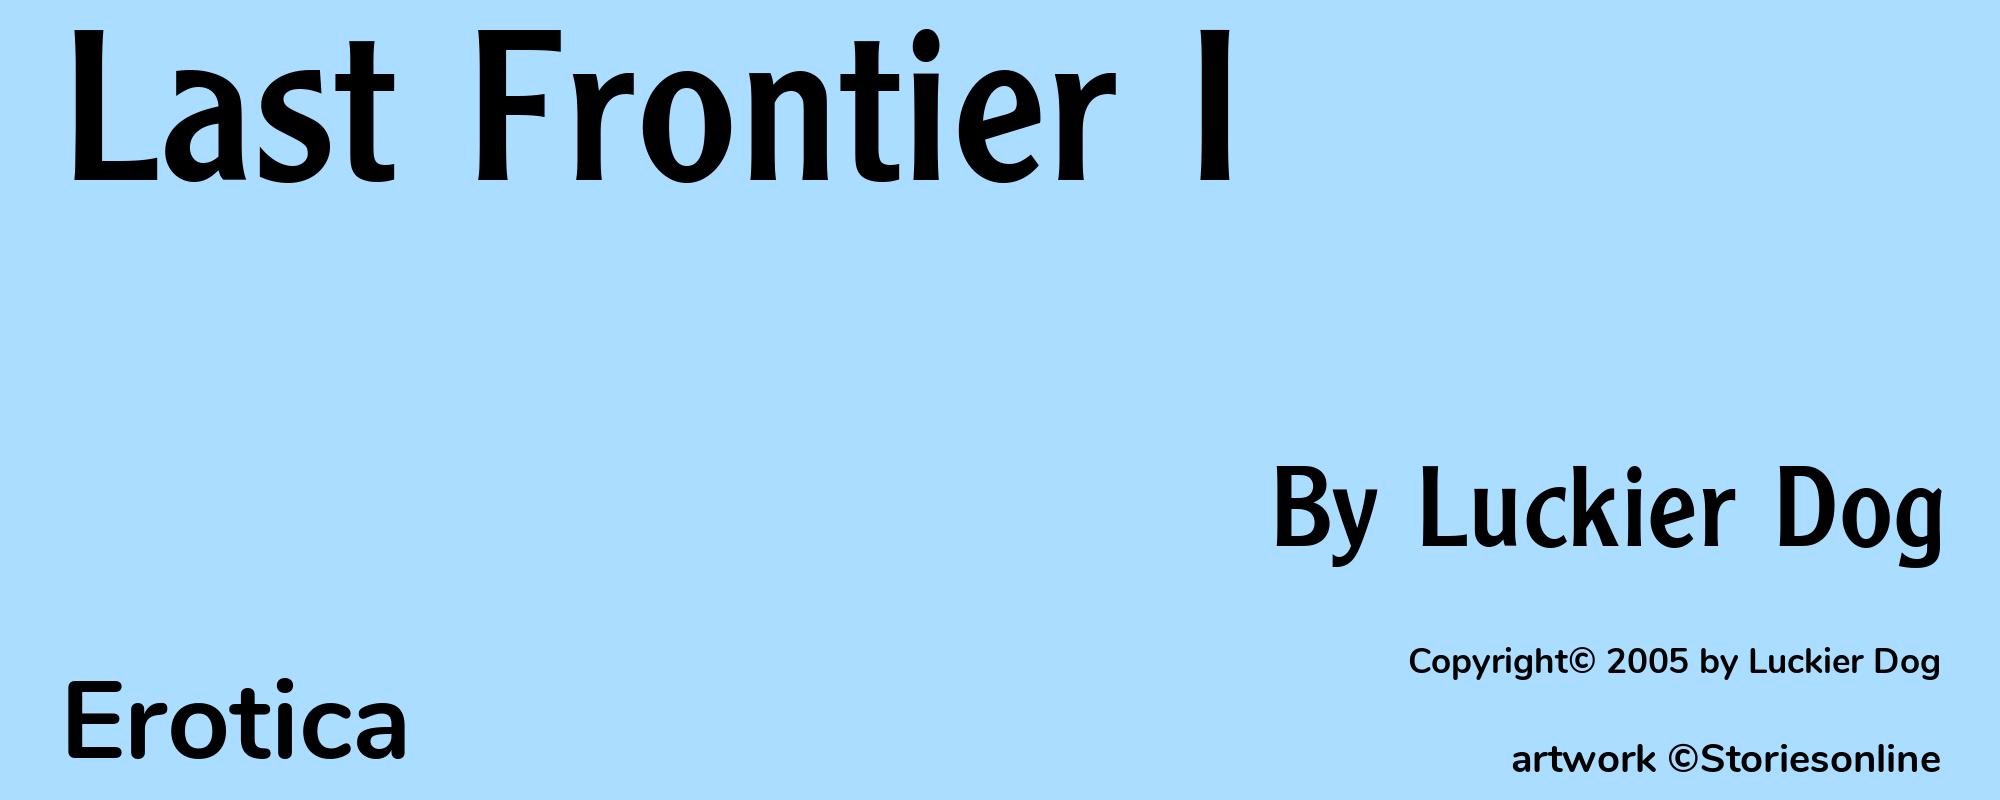 Last Frontier I - Cover